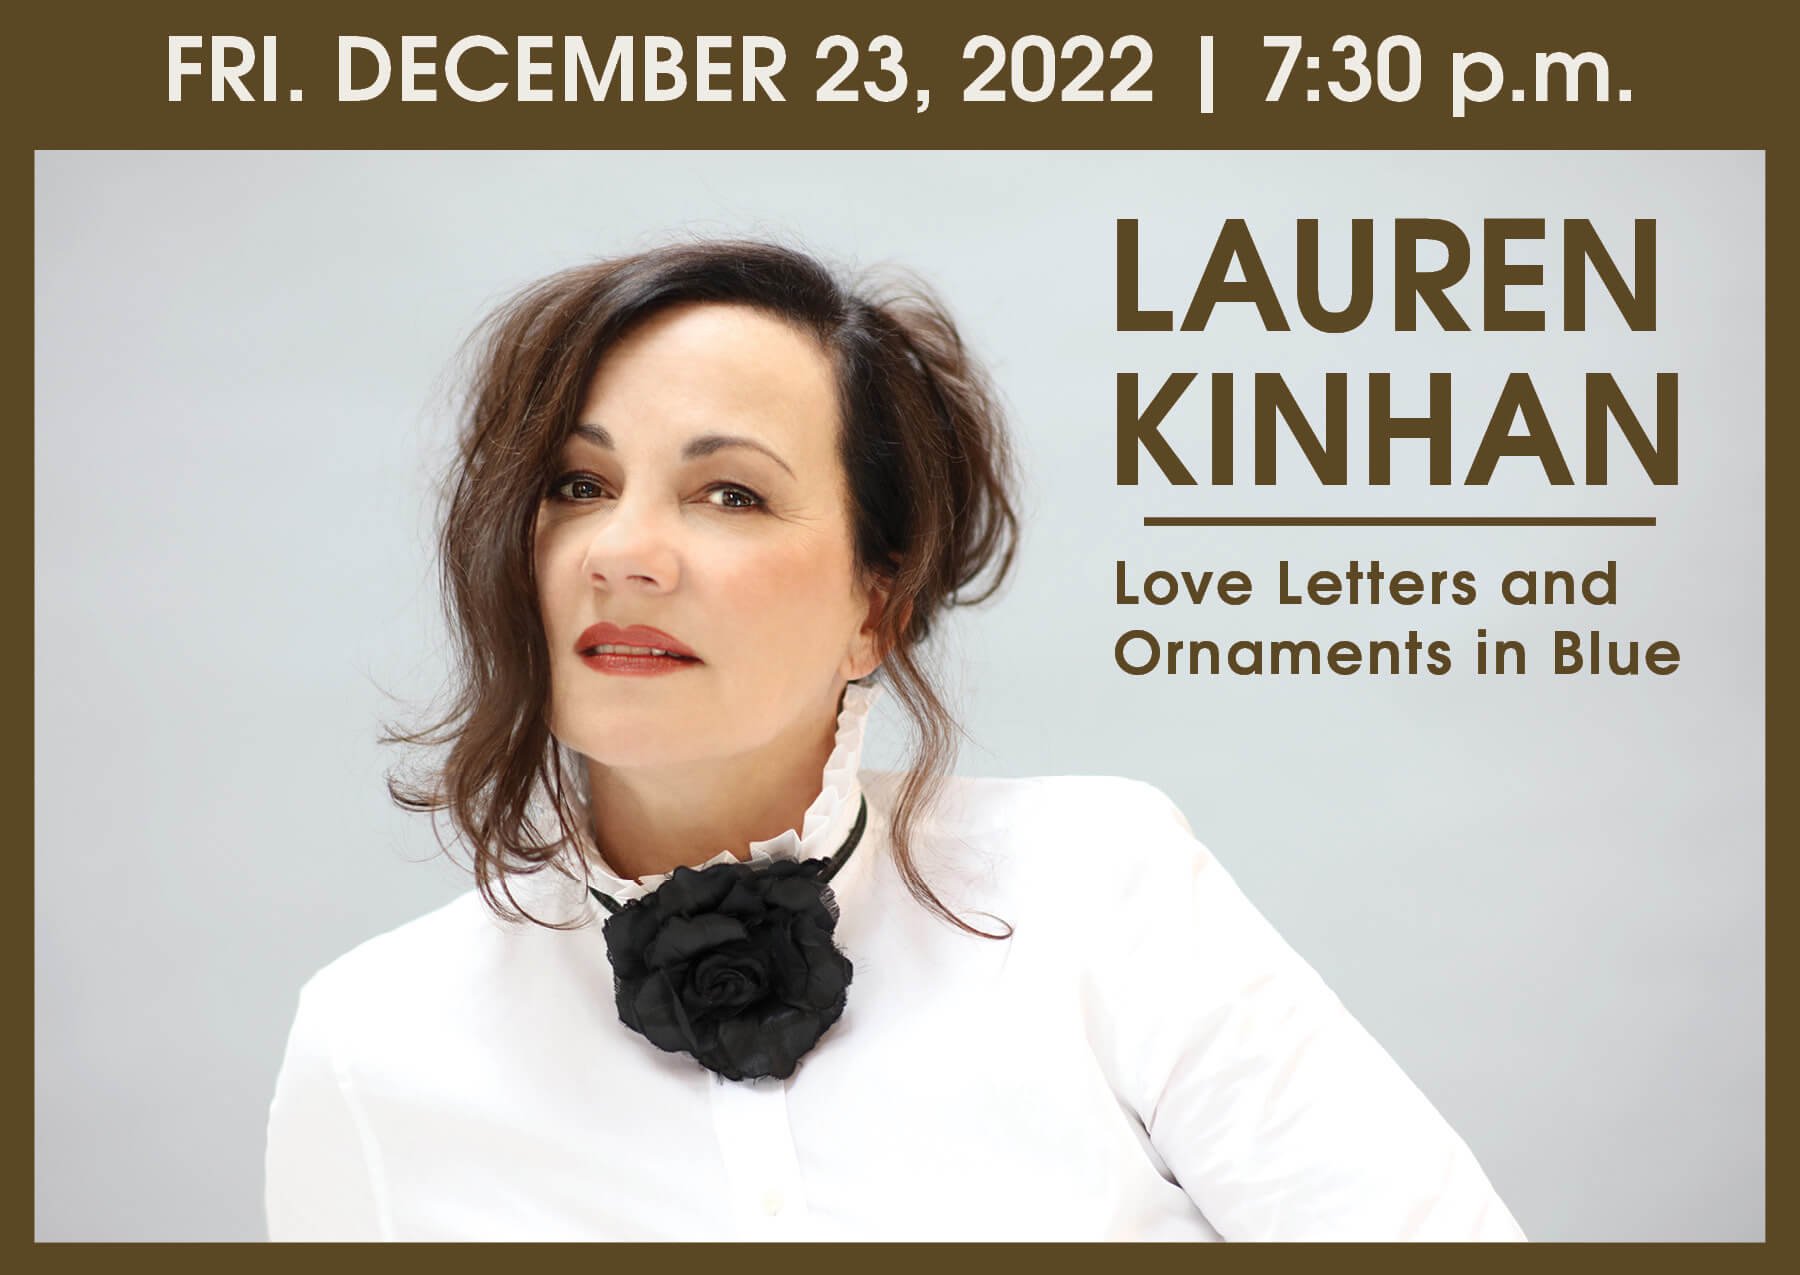 Lauren Kinhan | Love Letters and Ornaments in Blue